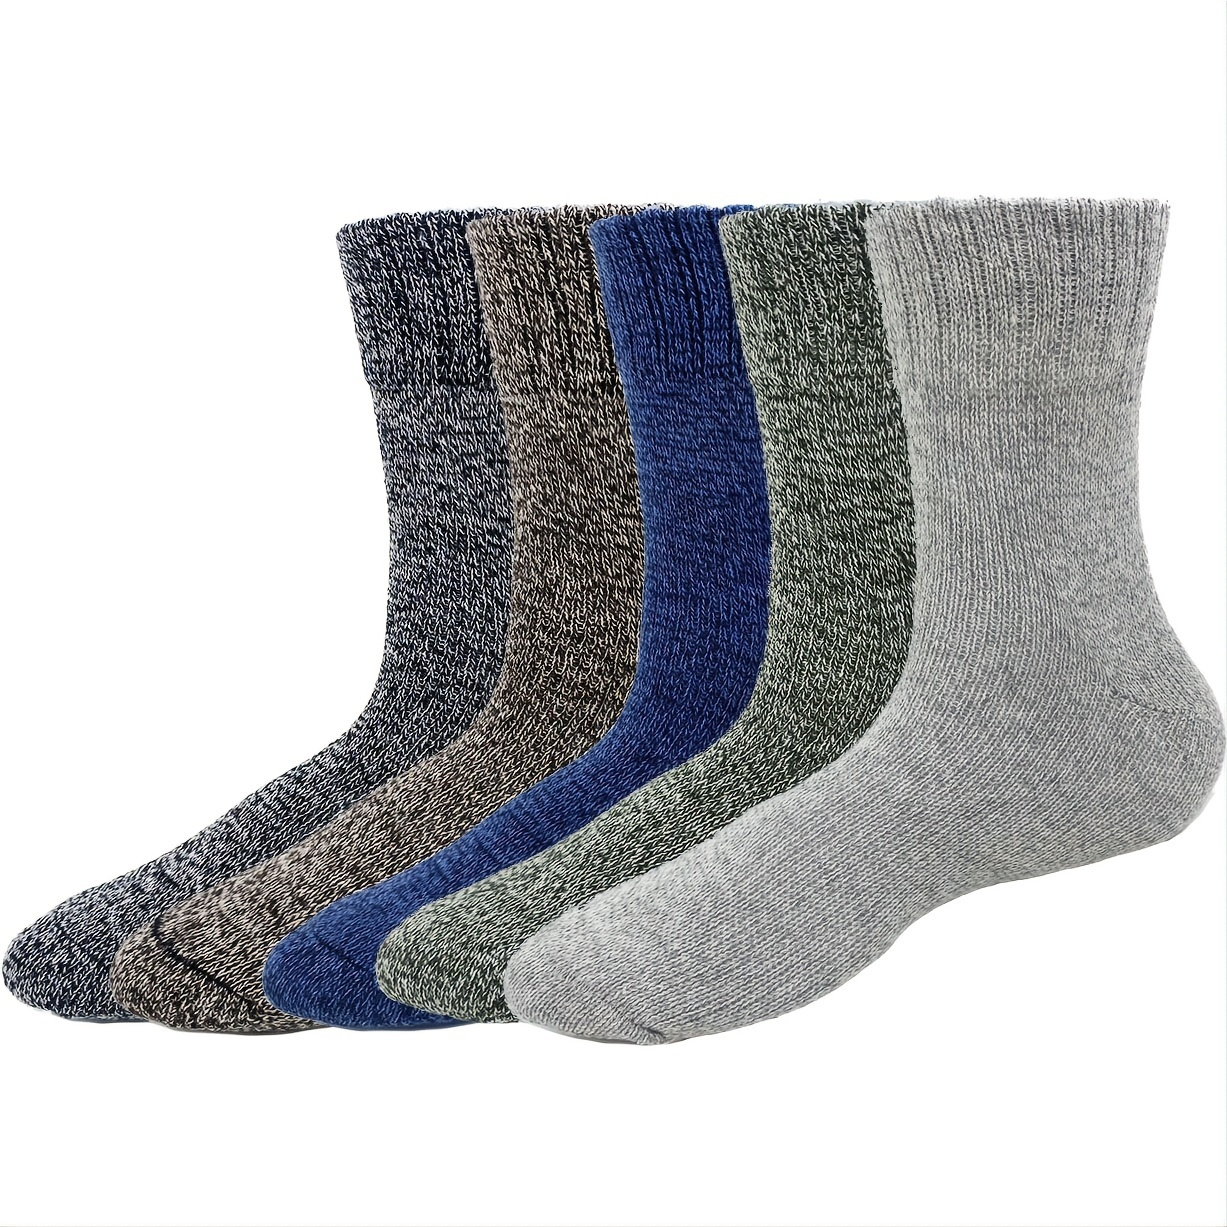 5pairs Men's Cotton Thick Warm Winter Socks For Hiking Or Outdoor ...